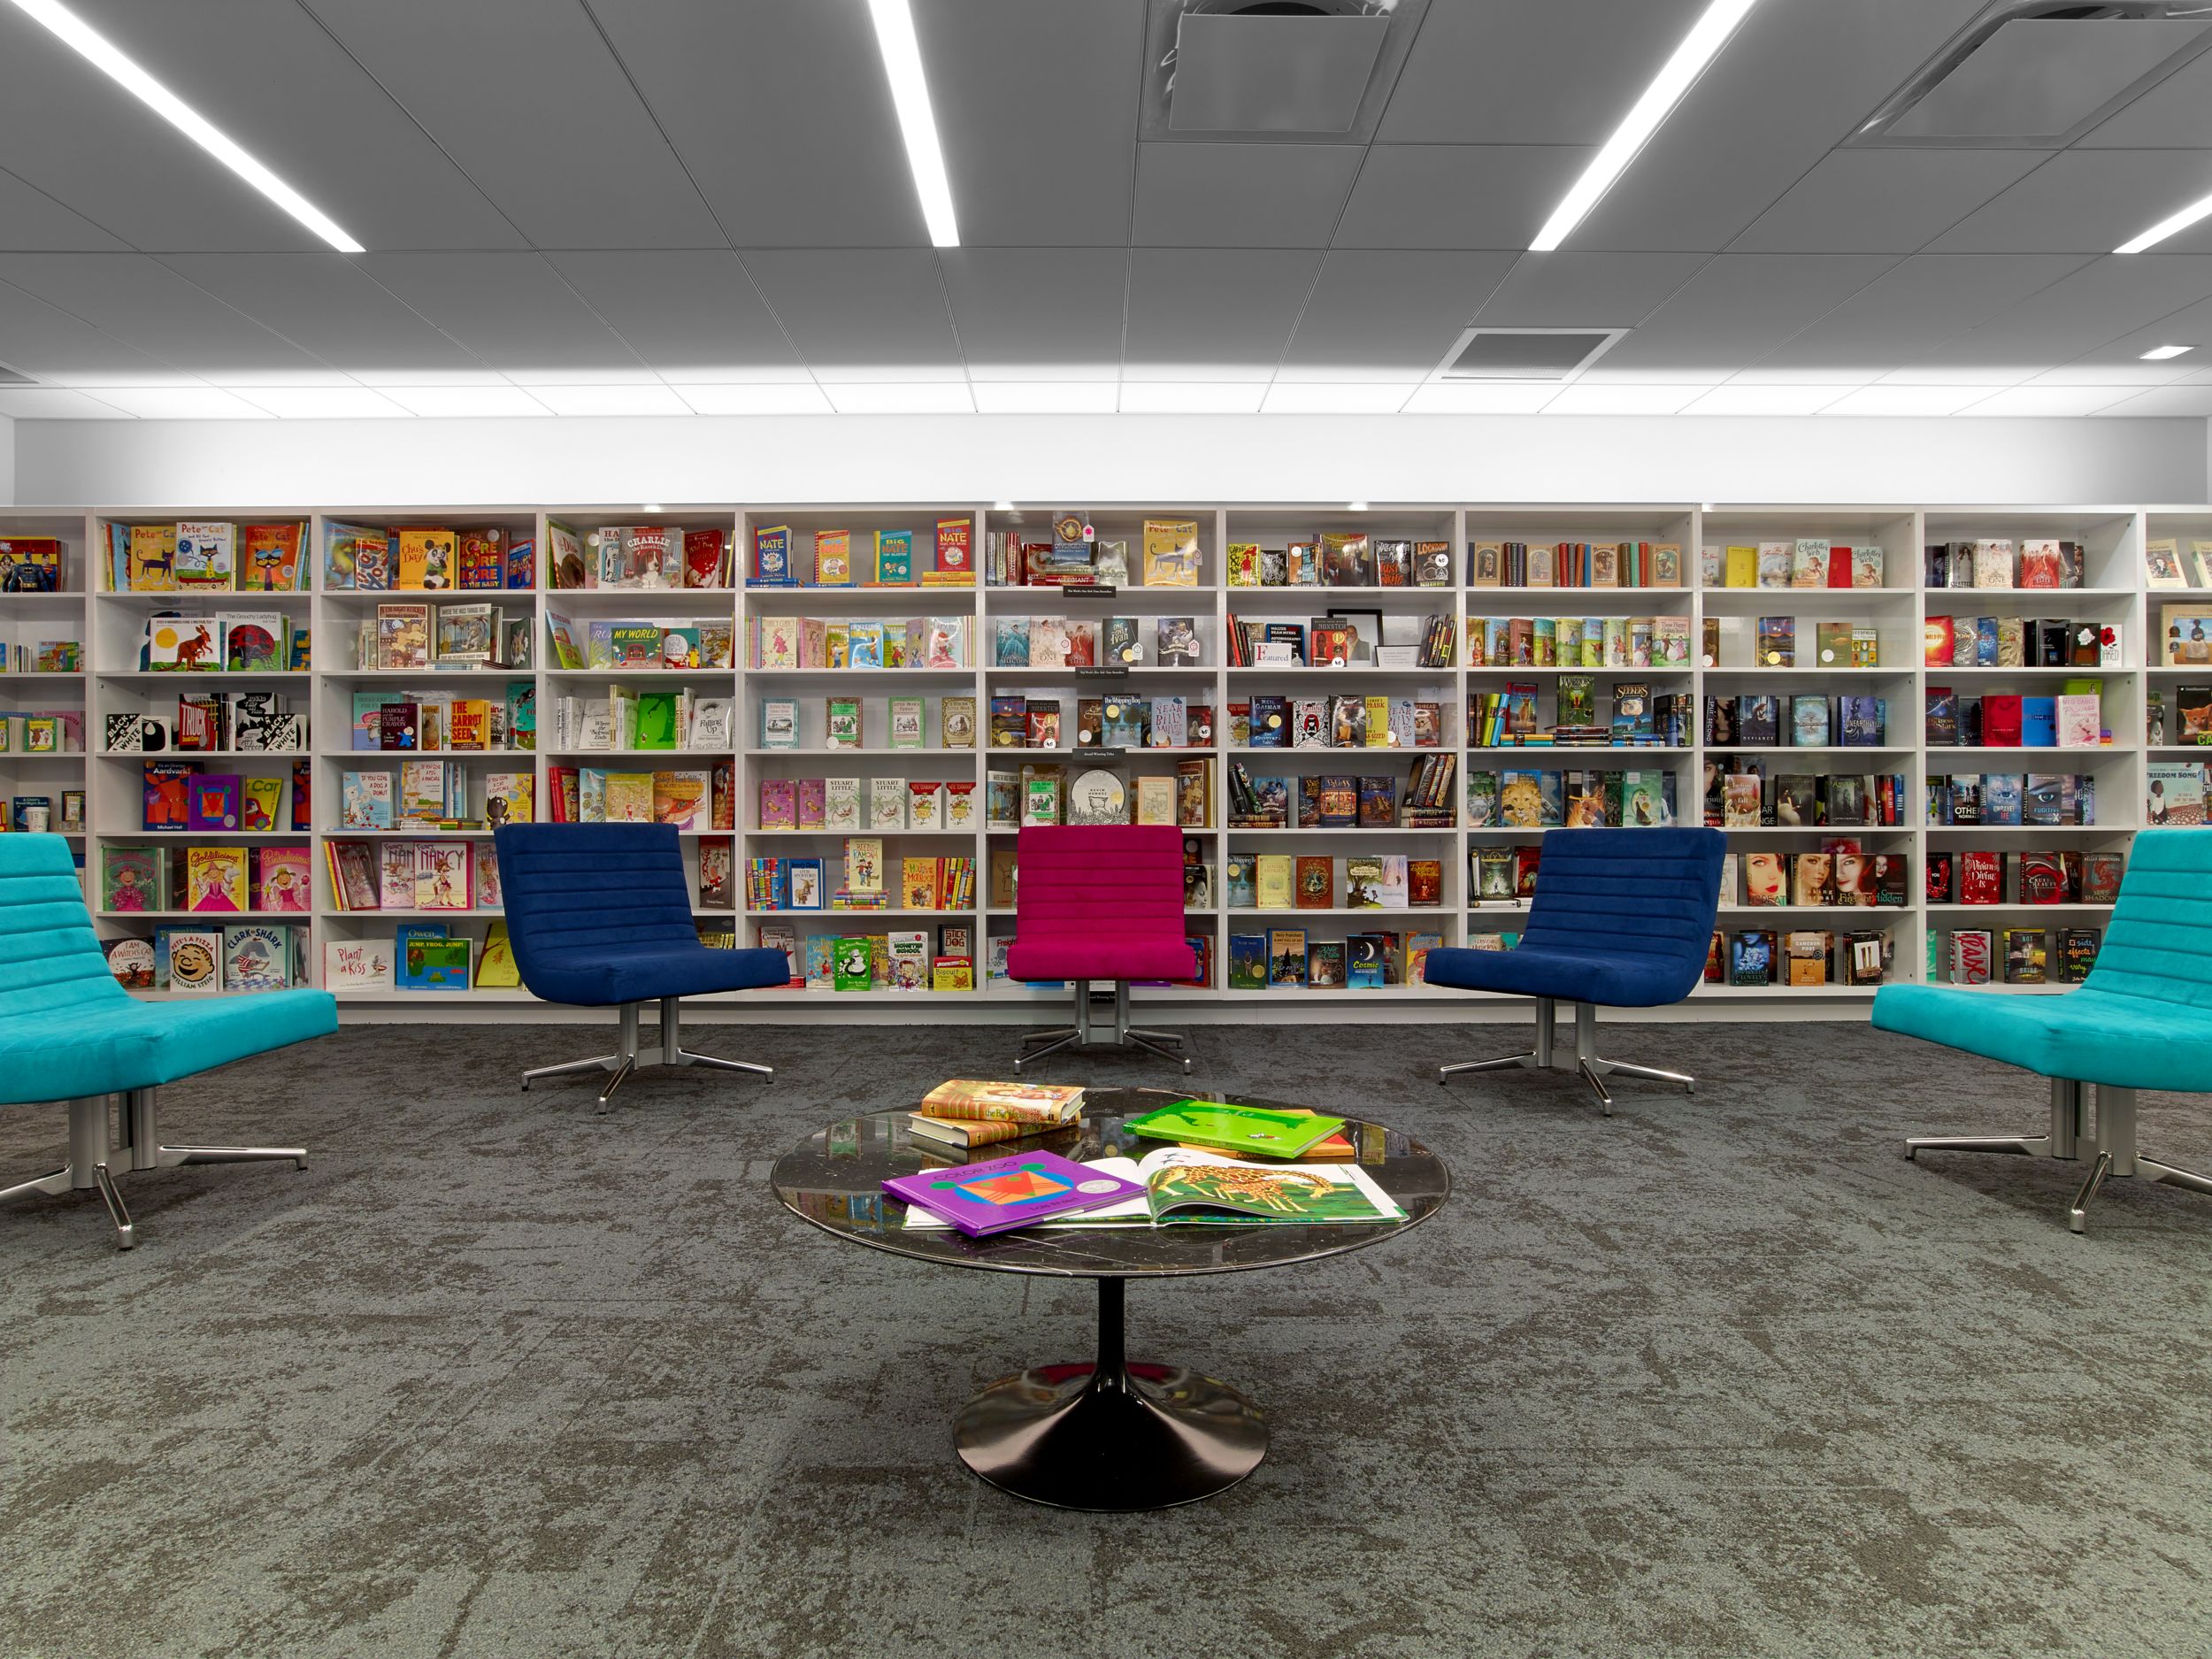 Interface B603 carpet tile in area with bookshelves and colorful chairs Bildnummer 6